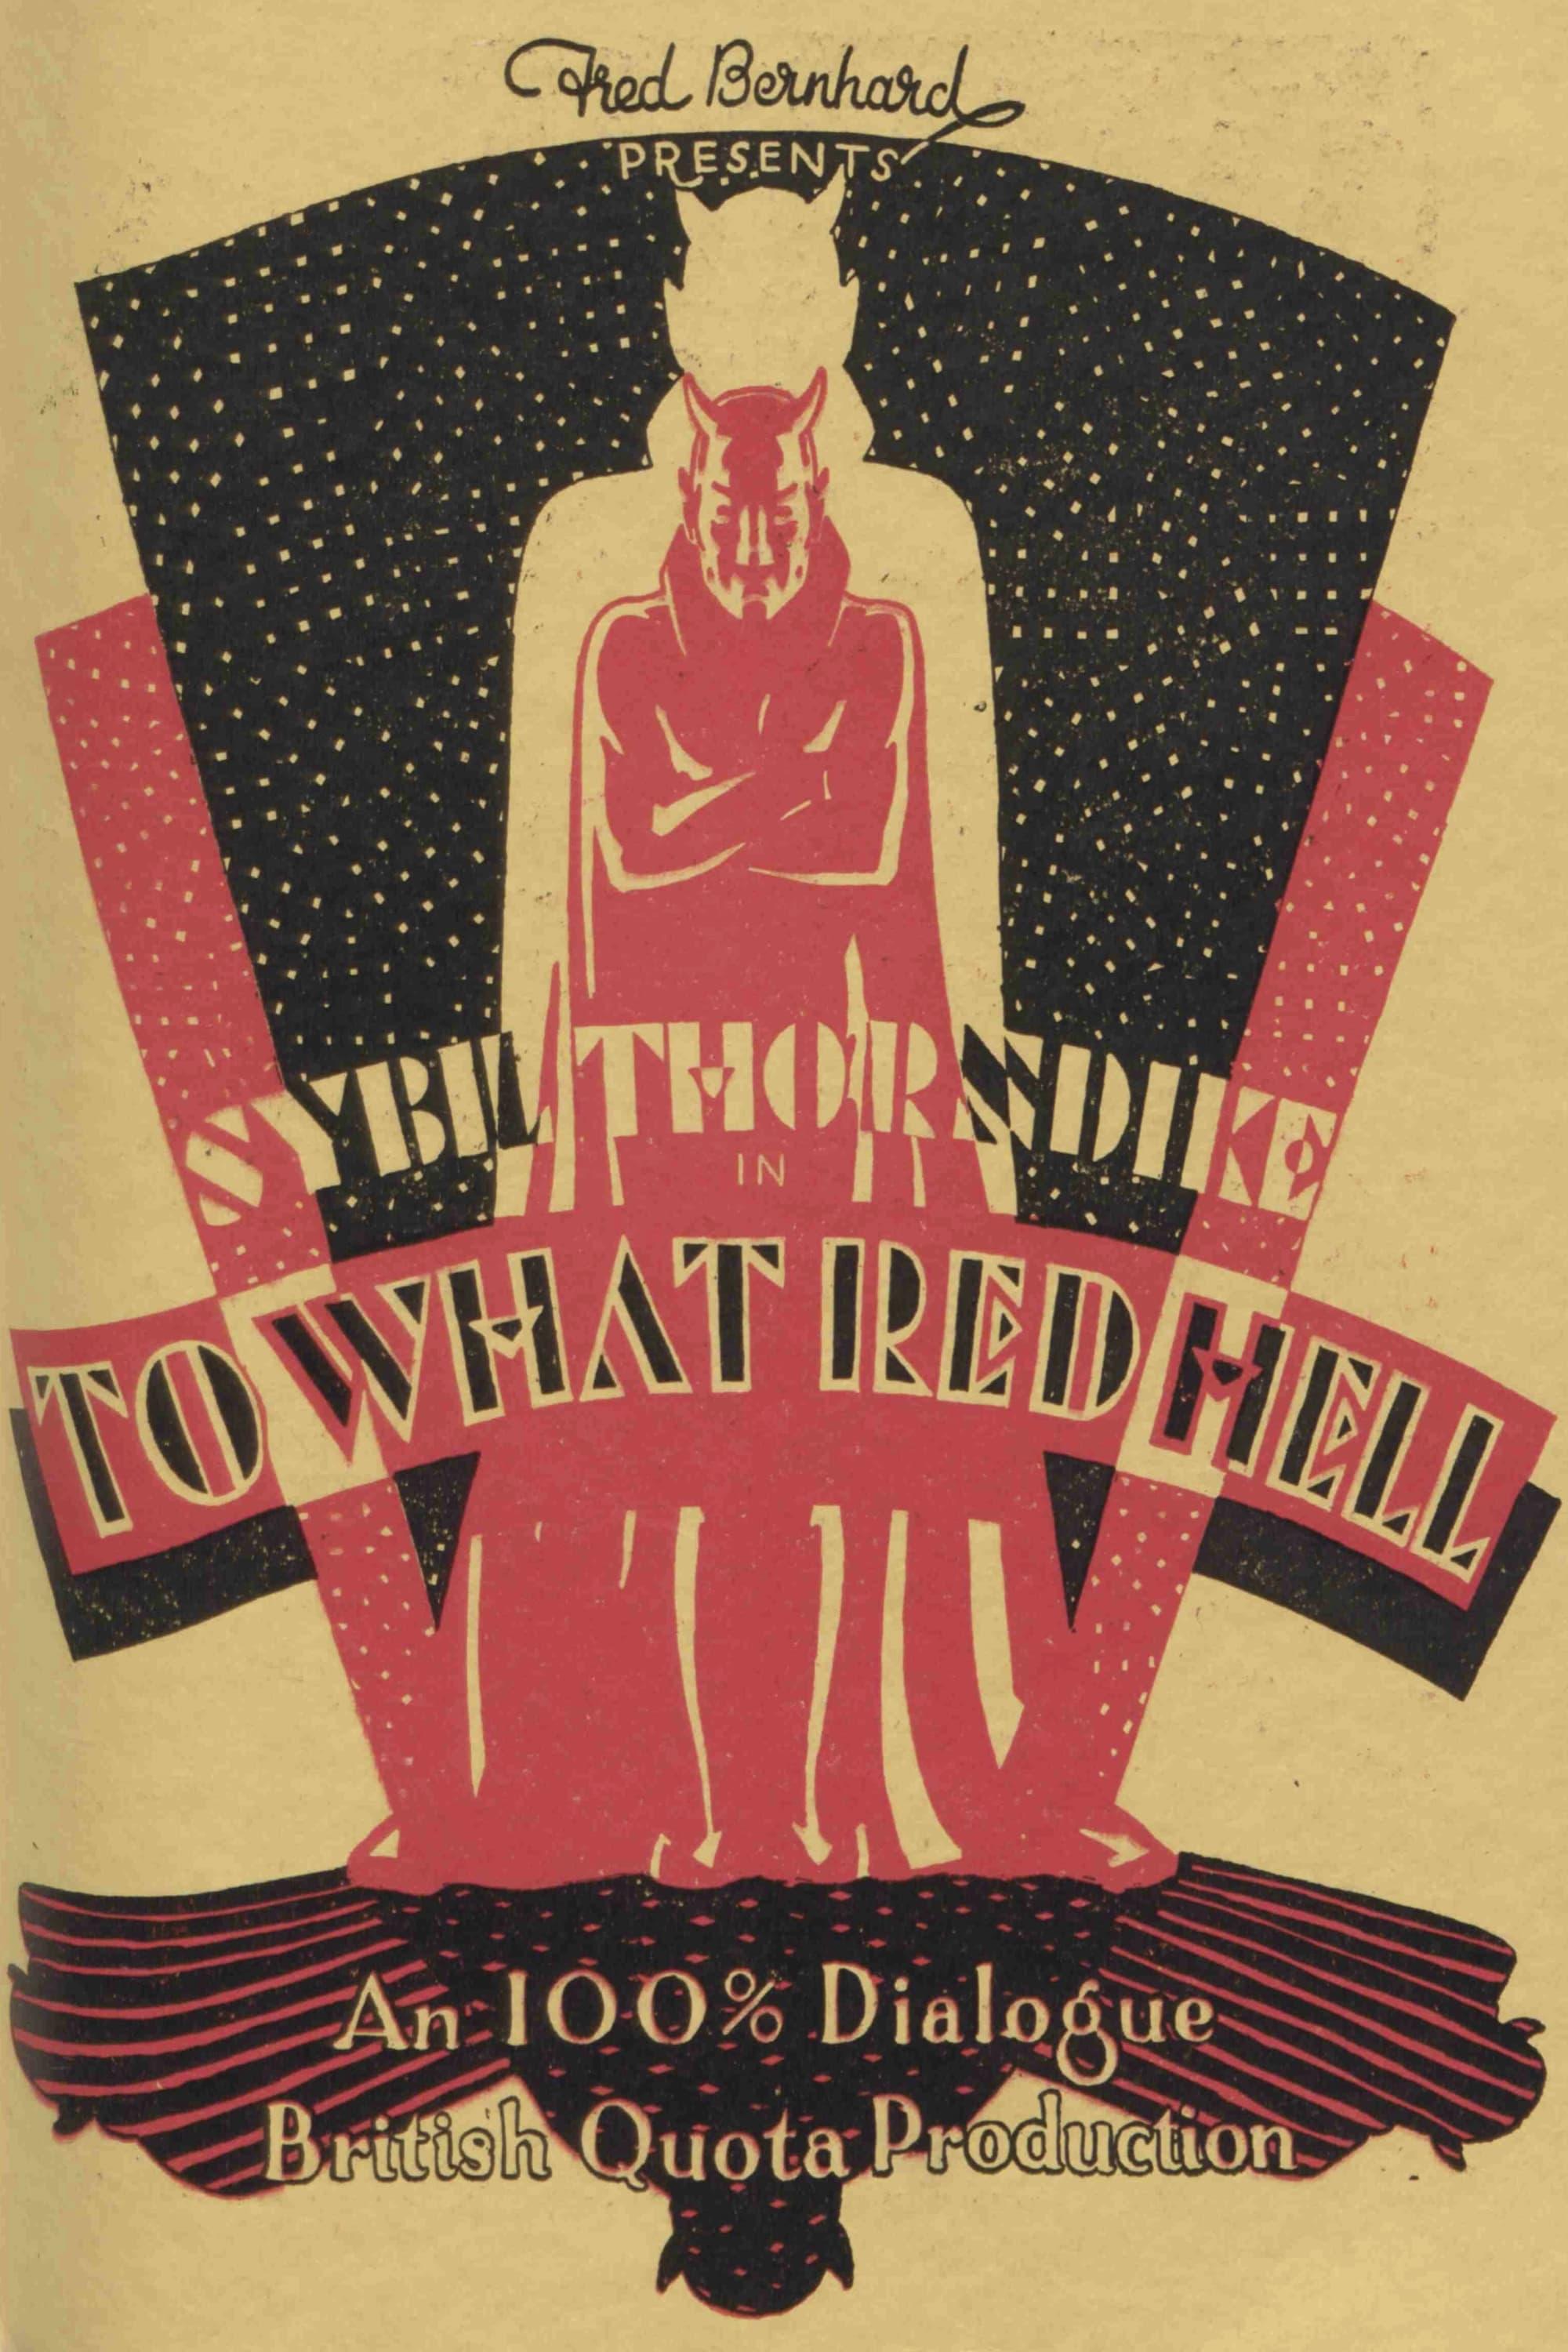 To What Red Hell poster